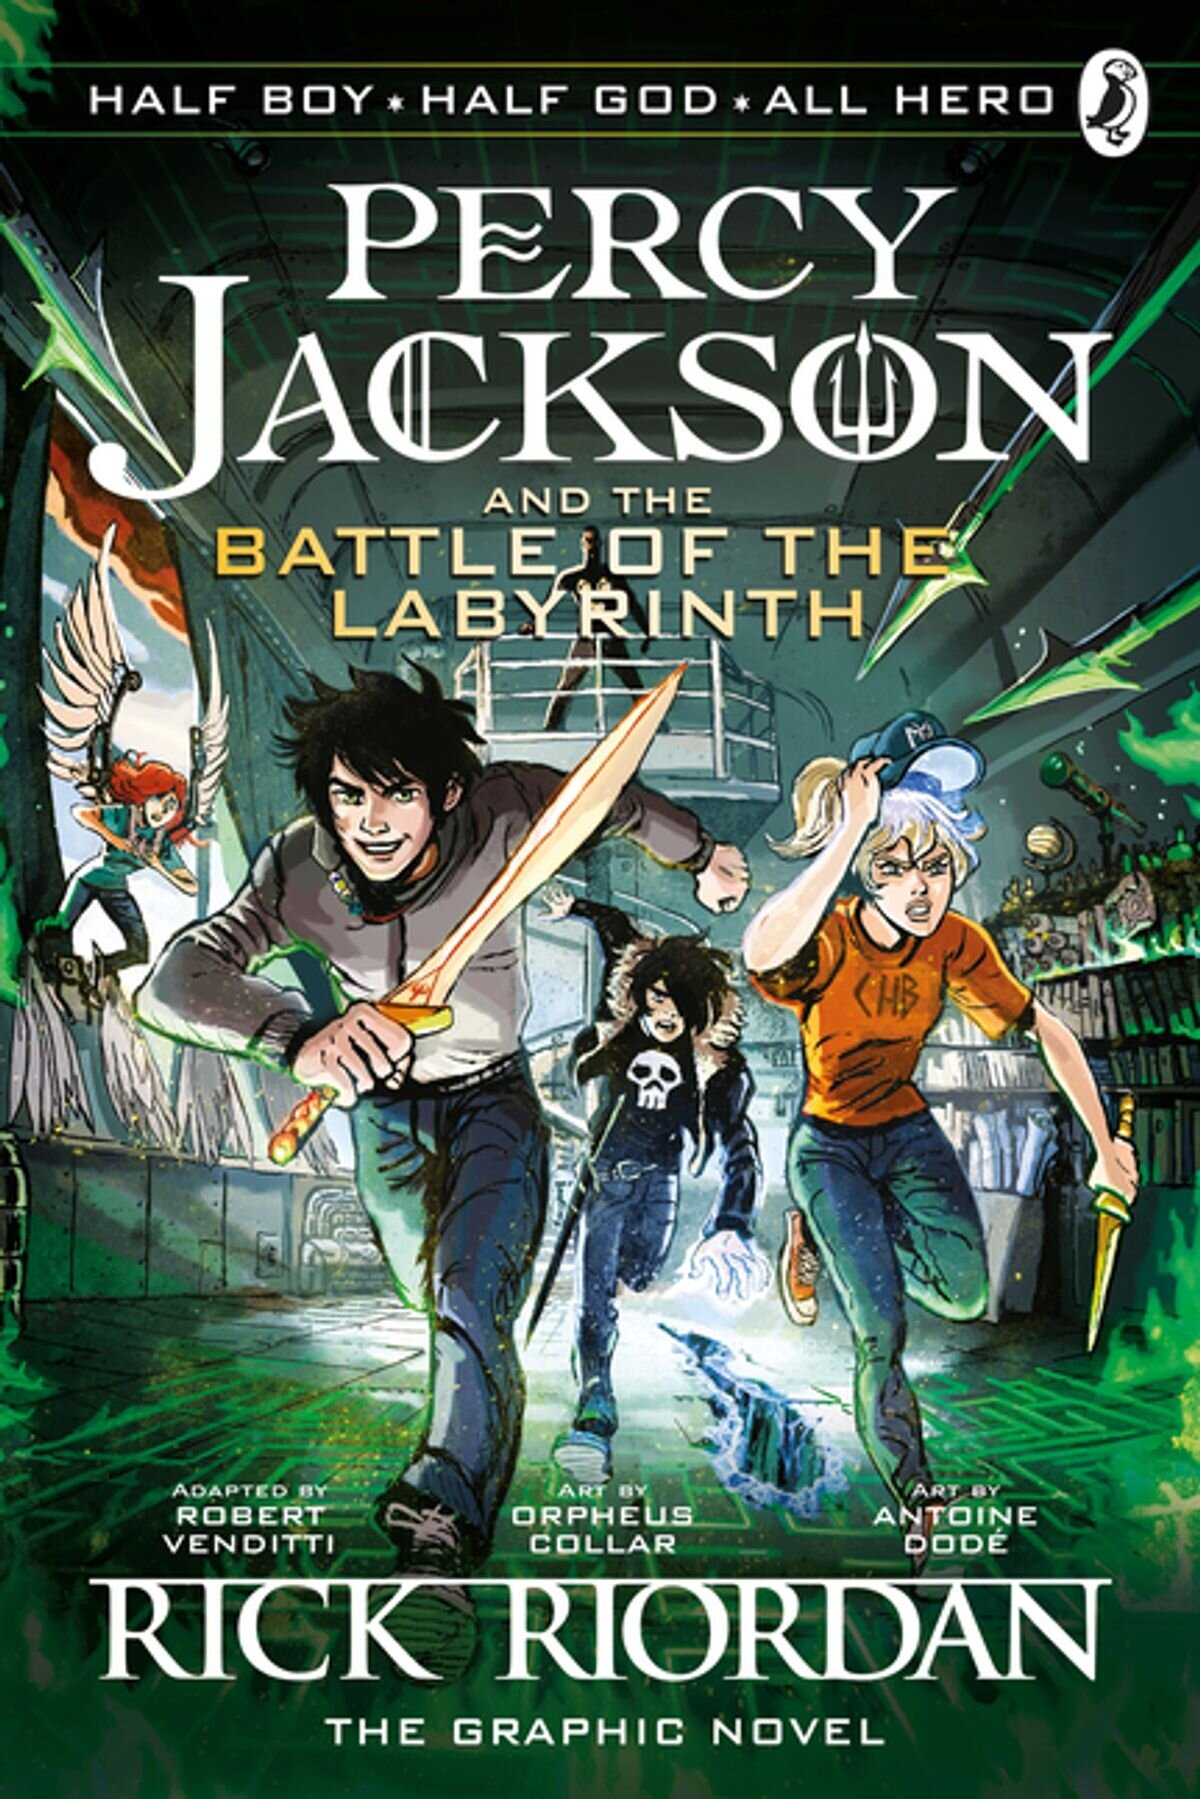 the-battle-of-the-labyrinth-the-graphic-novel-percy-jackson-book-4.jpg